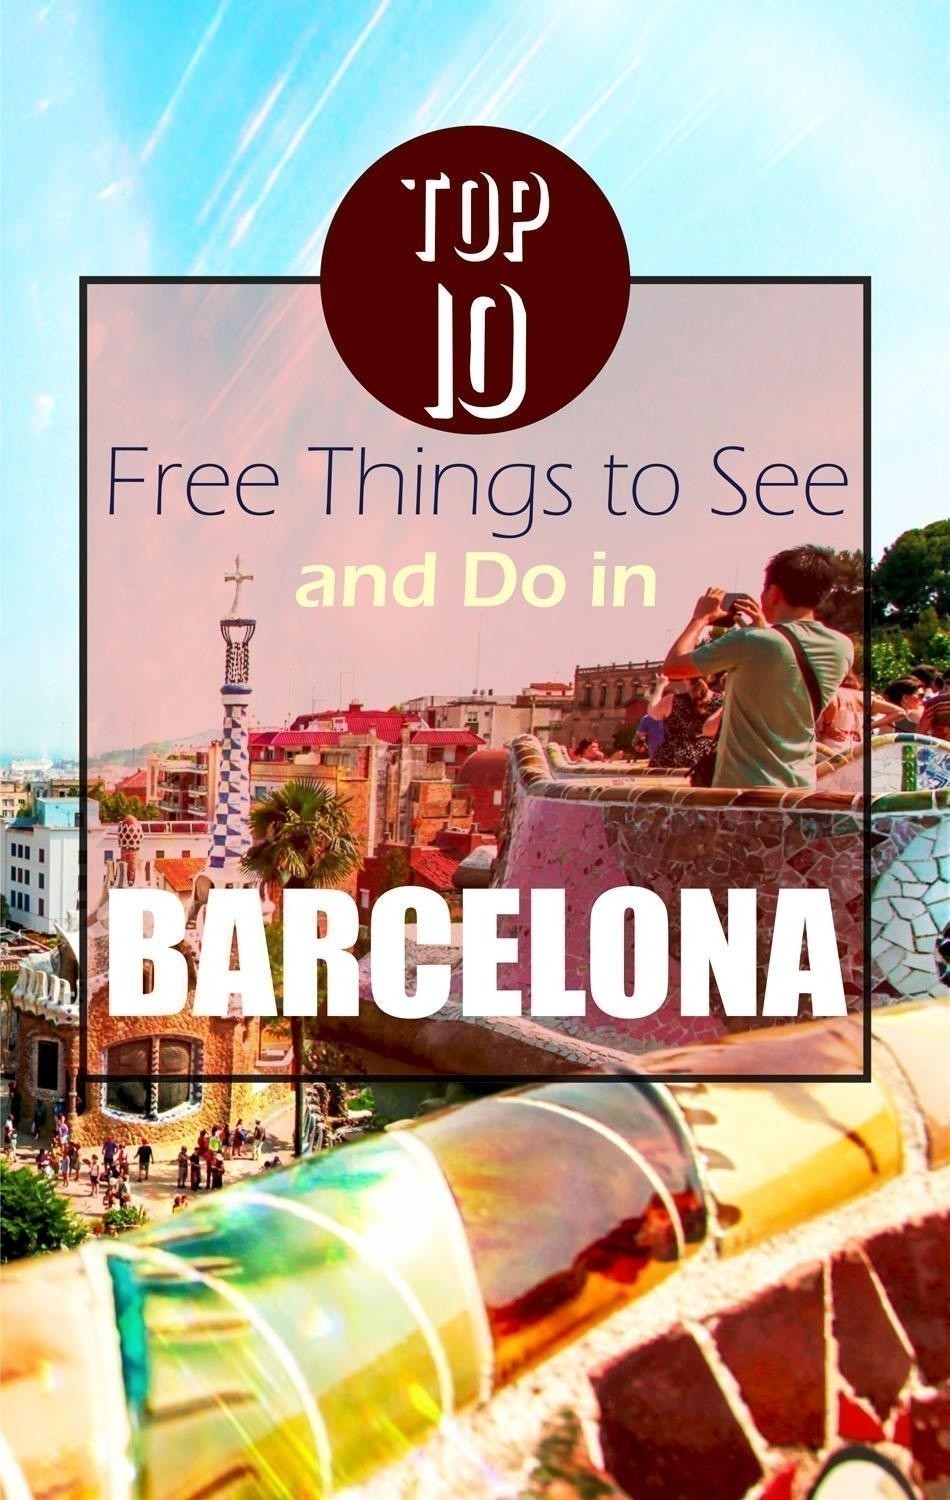 TOP 10 Free Things to See and Do in Barcelona #barcelona #spain 